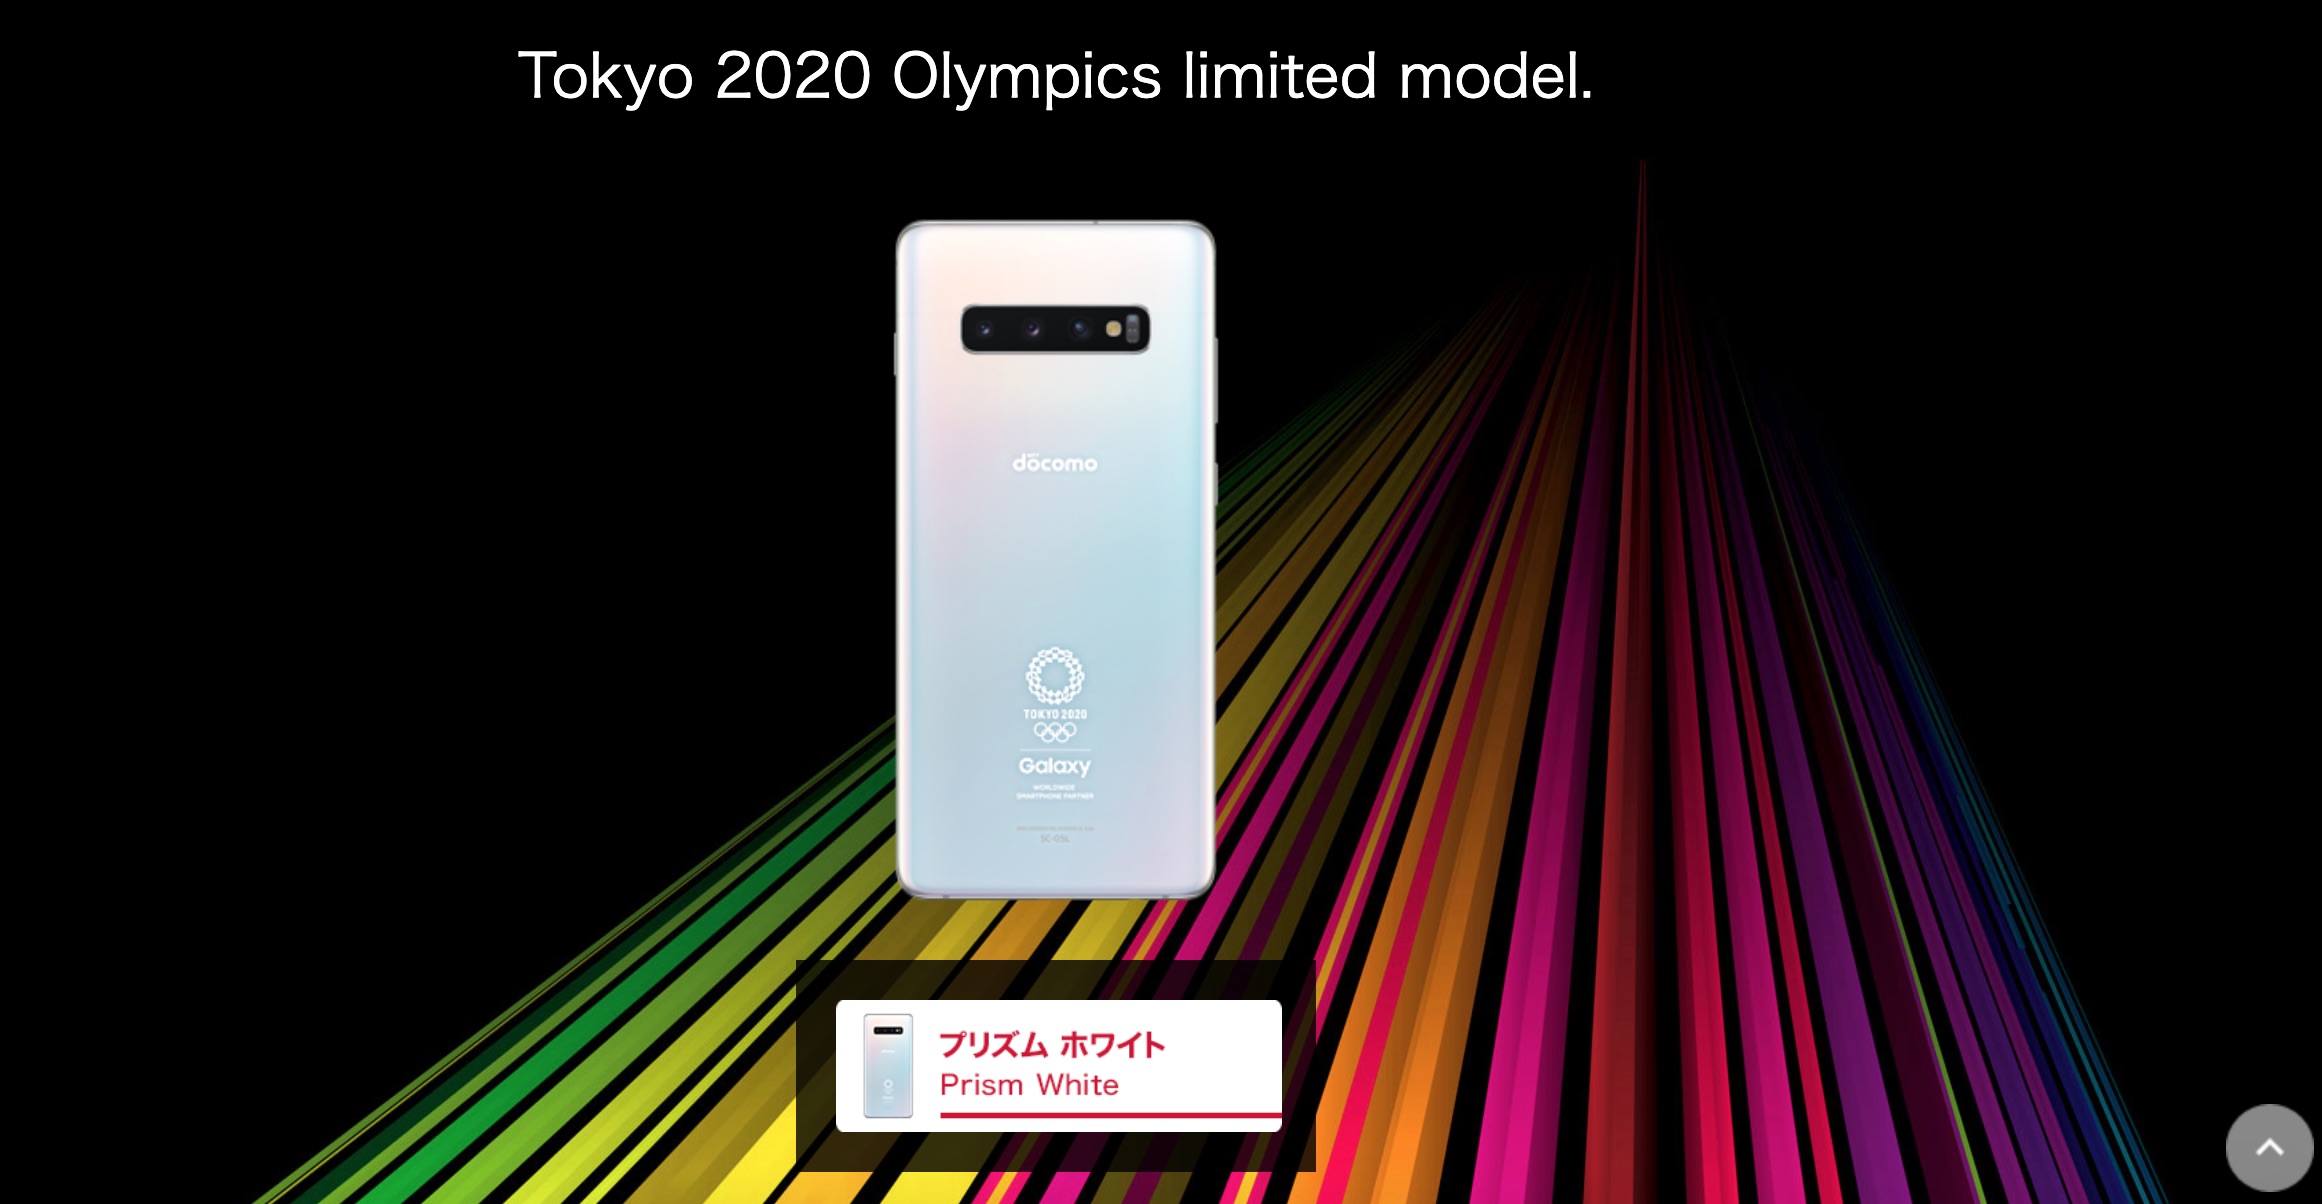 NTT Docomo to release Tokyo Olympics edition of Galaxy S10+